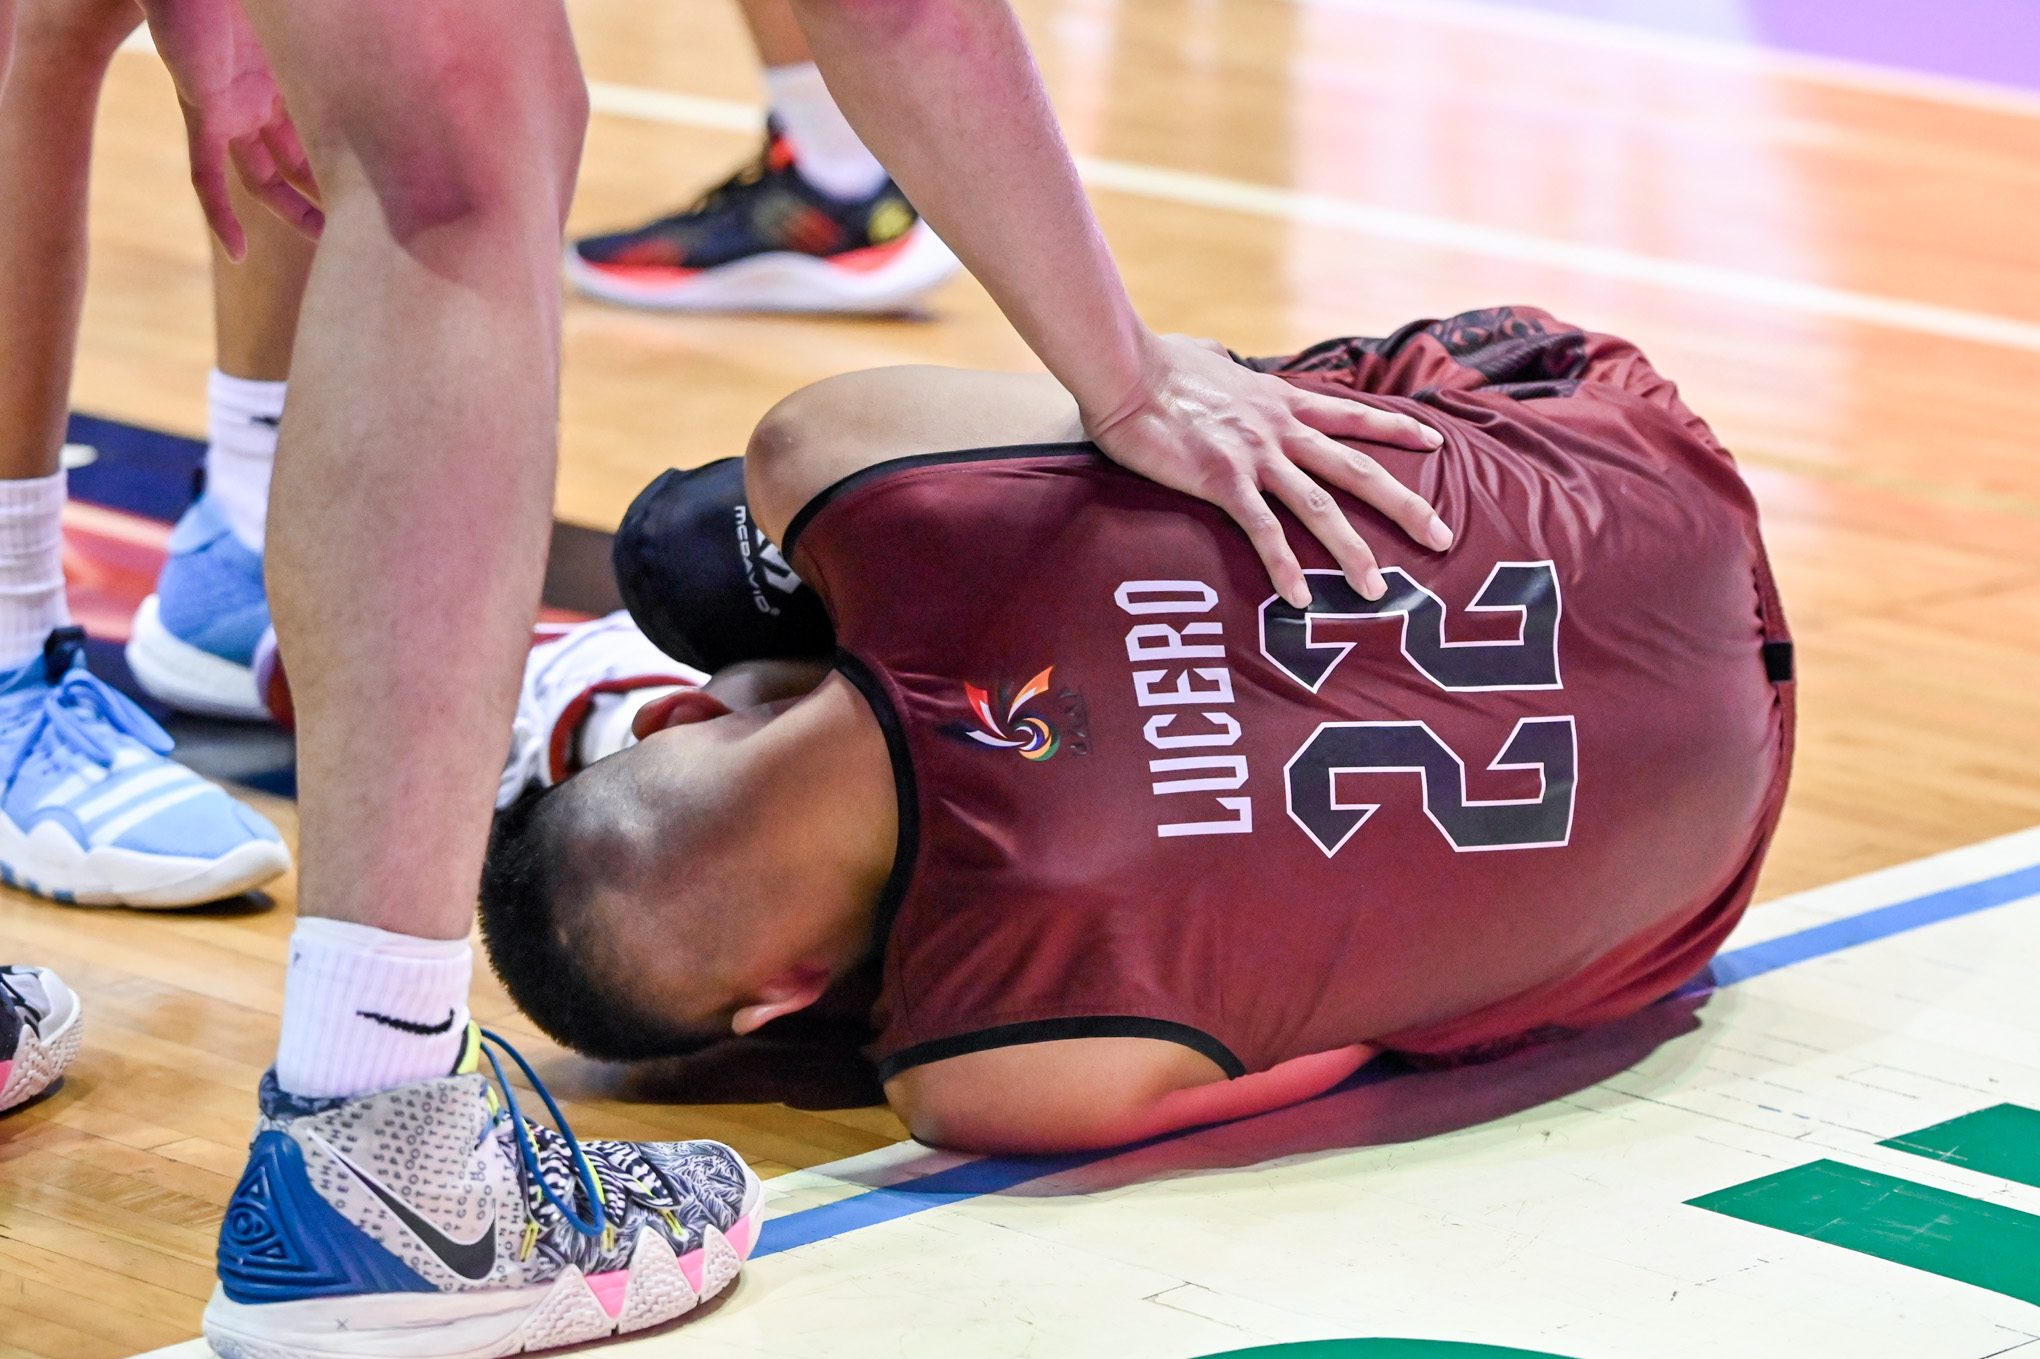 UP frontcourt stars Tamayo, Diouf to shoulder heavier burden as Lucero tears ACL